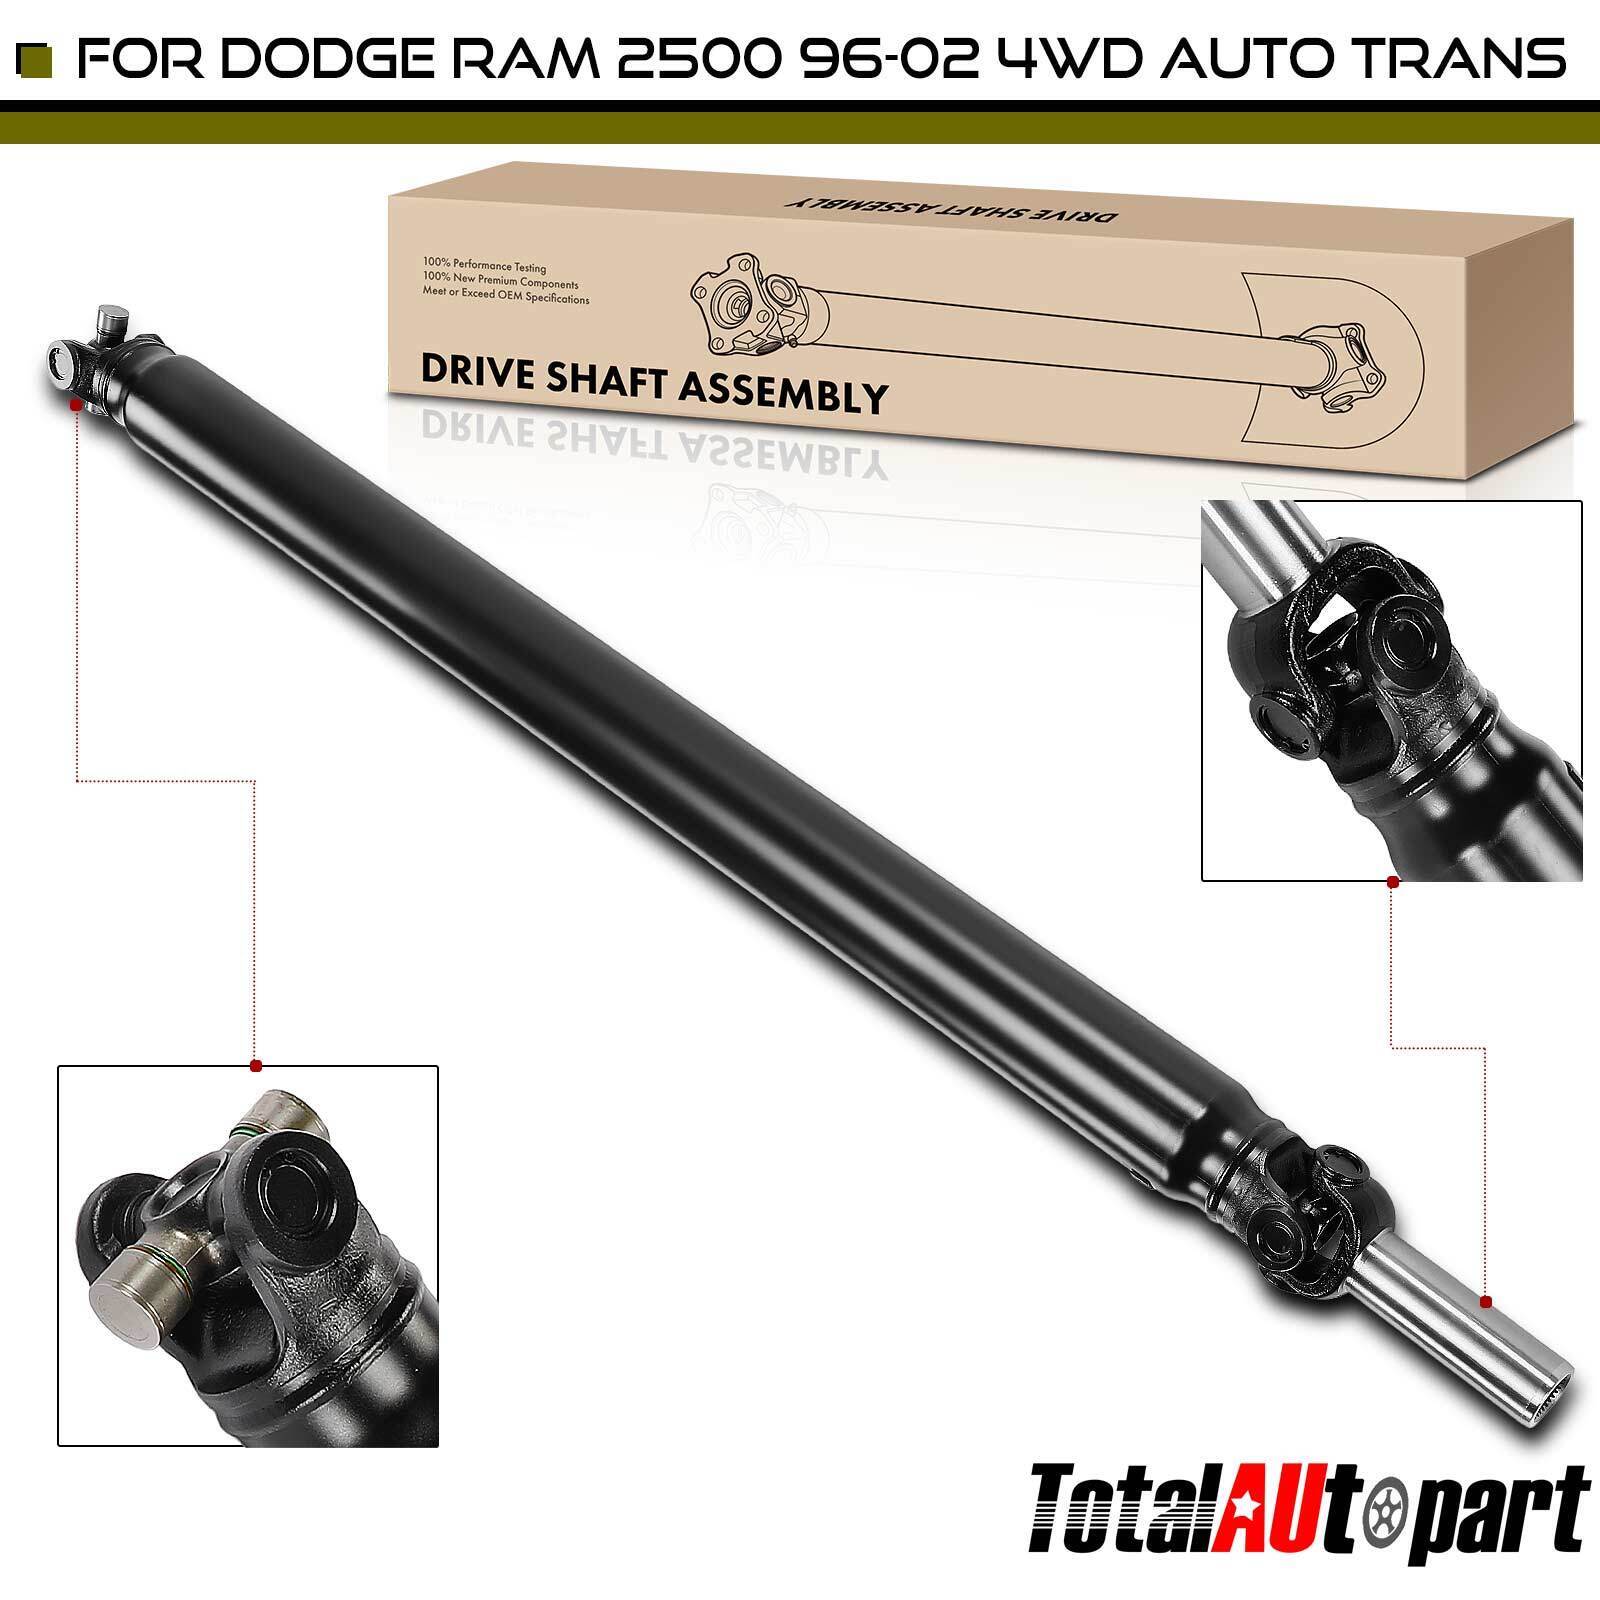 Drive Shaft Assembly for Dodge Ram 2500 1996-2002 Extended Cab Pickup 4WD Rear